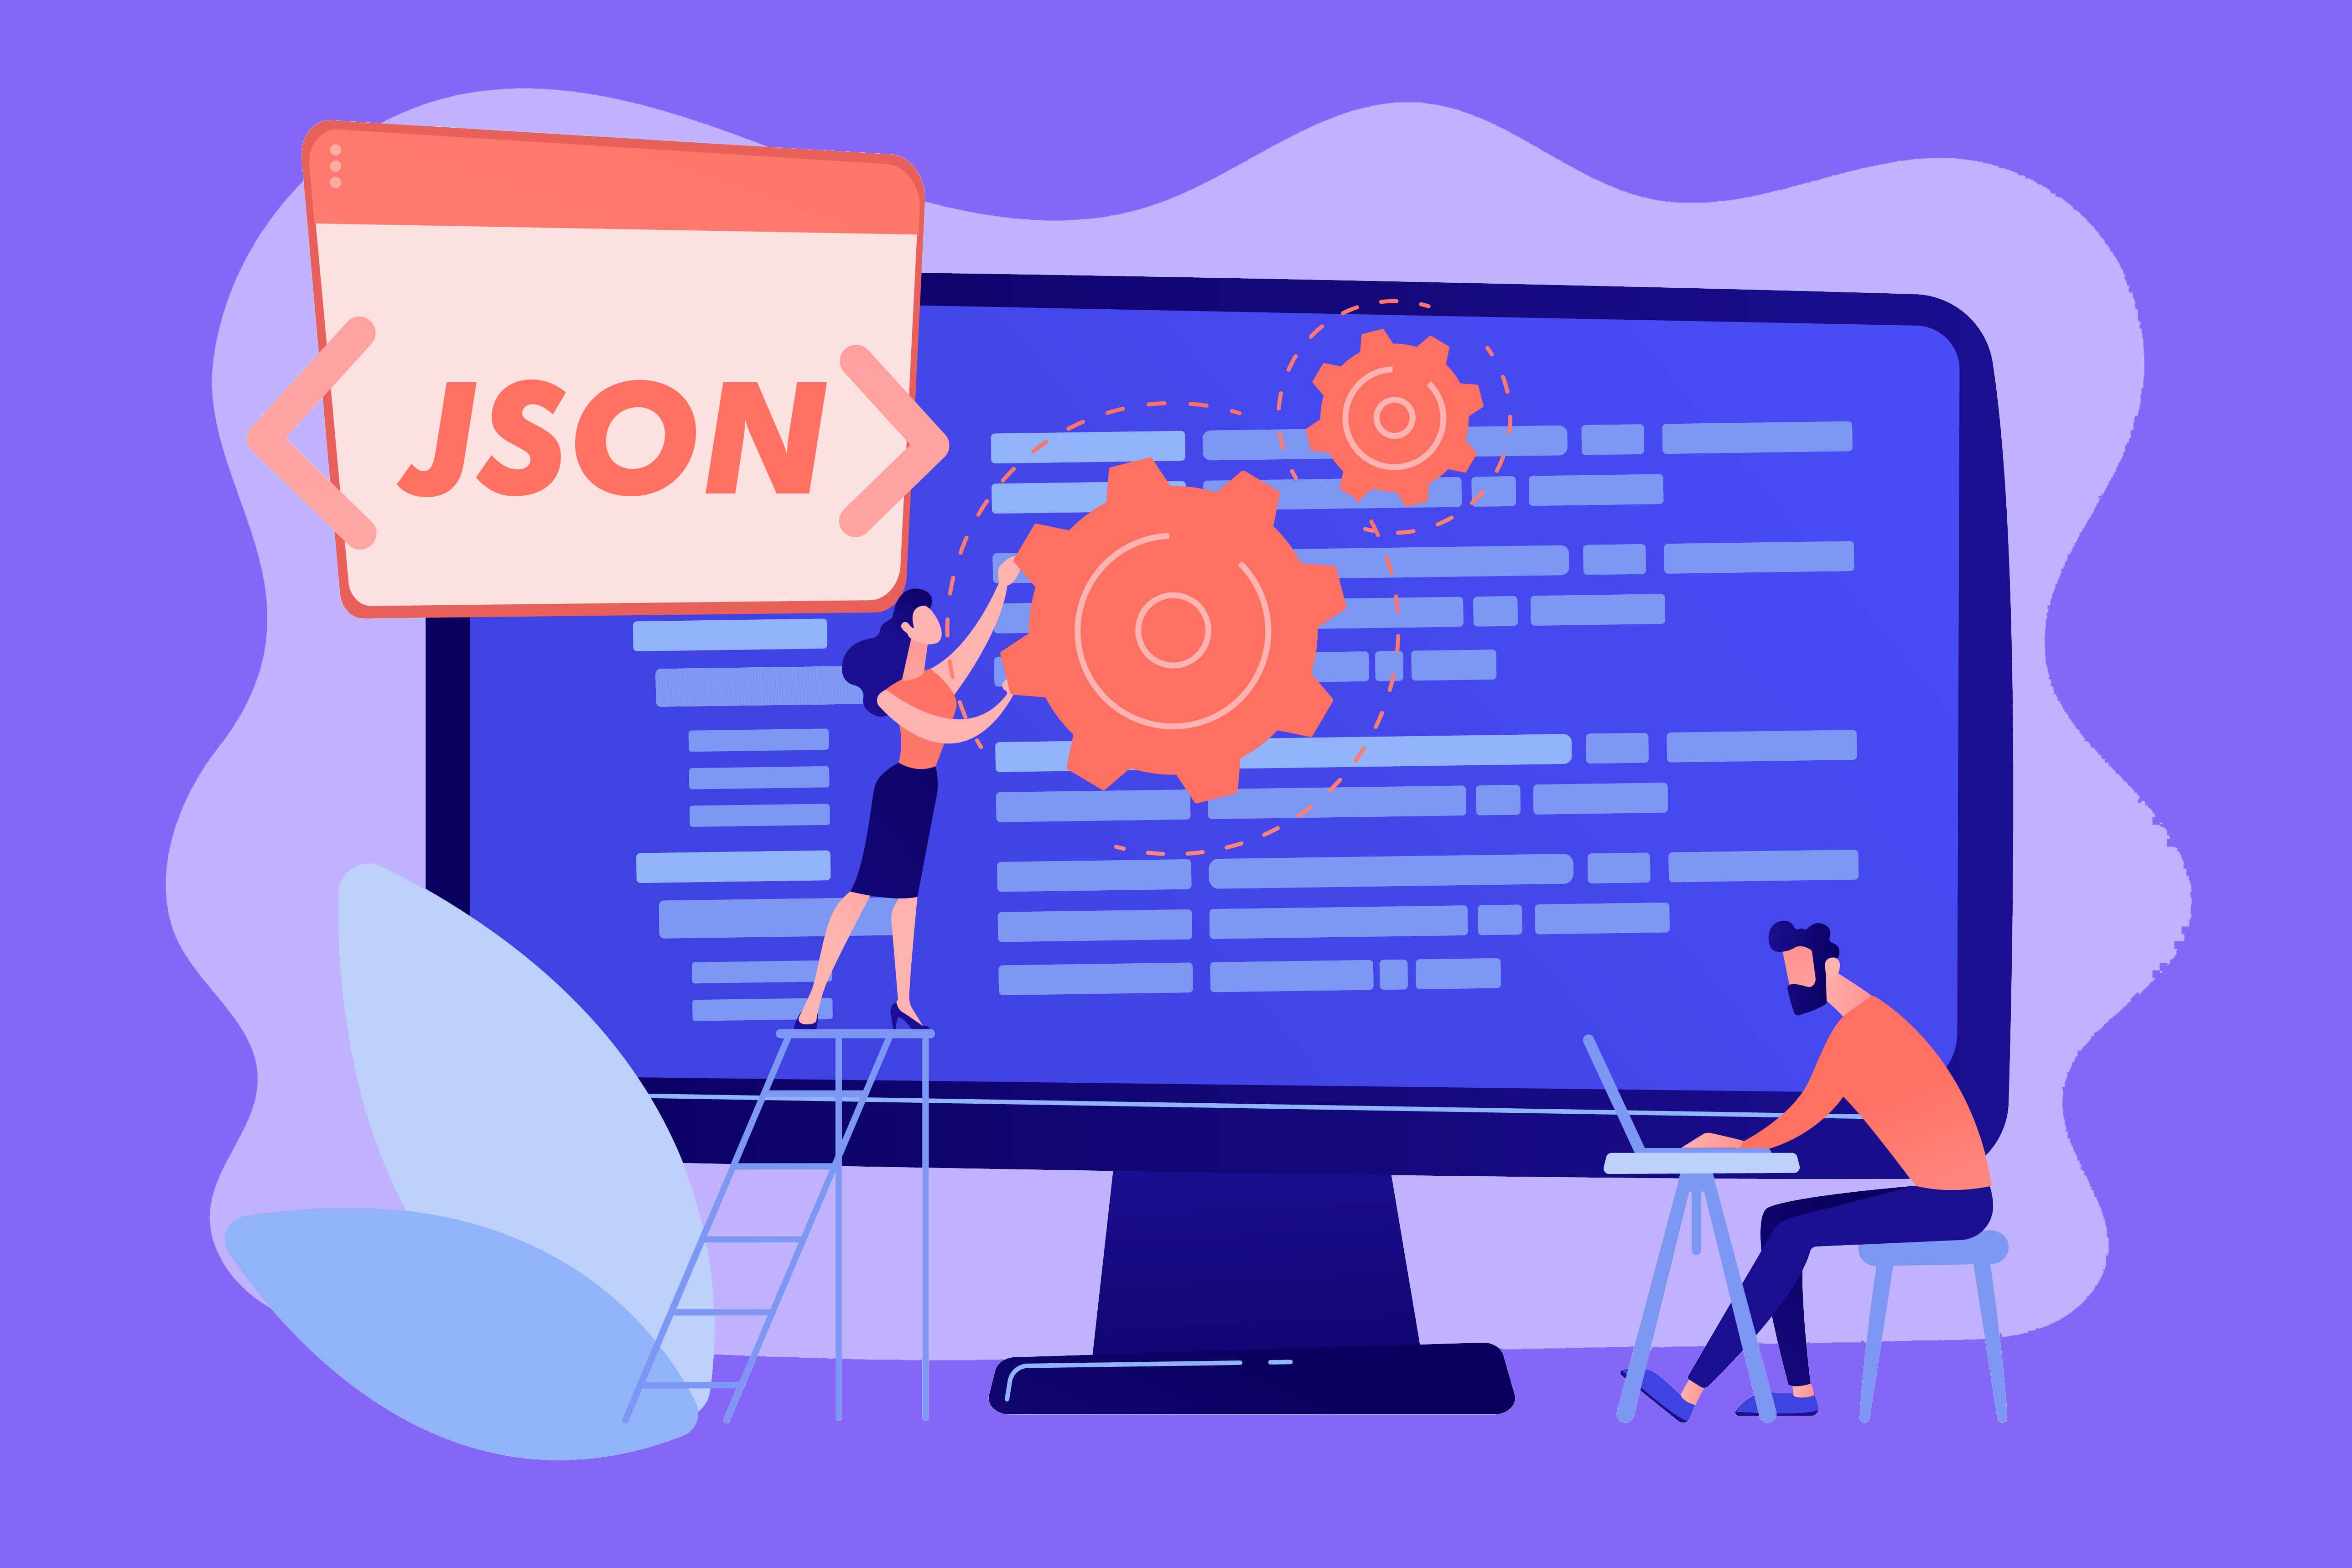 Beautify your JSON